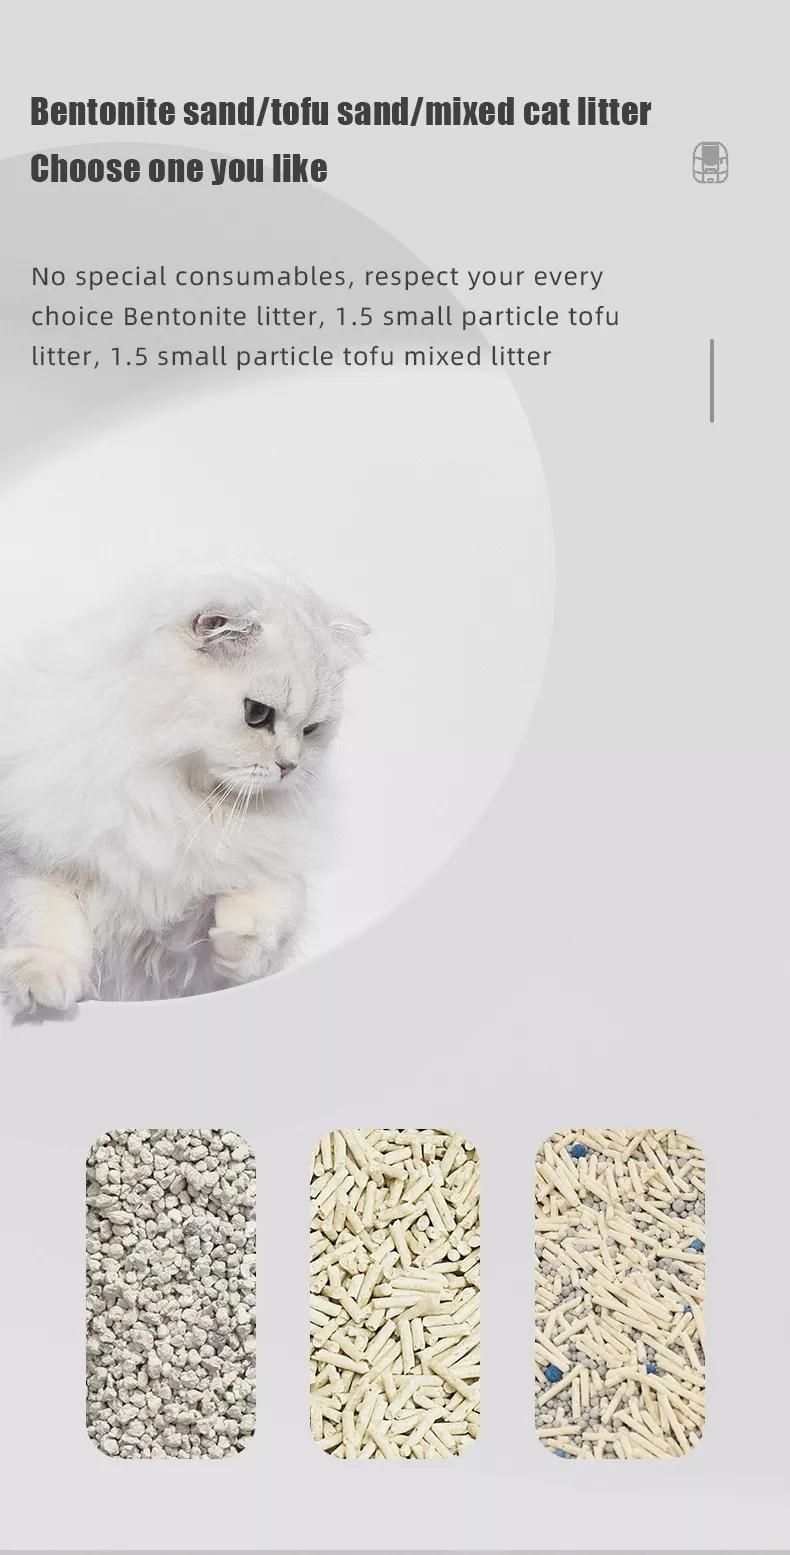 Hot Selling Automatic Self Cleaning Cat Litter Box Intelligent Pet Kitty Litter Basin Cat Toilet for Cats